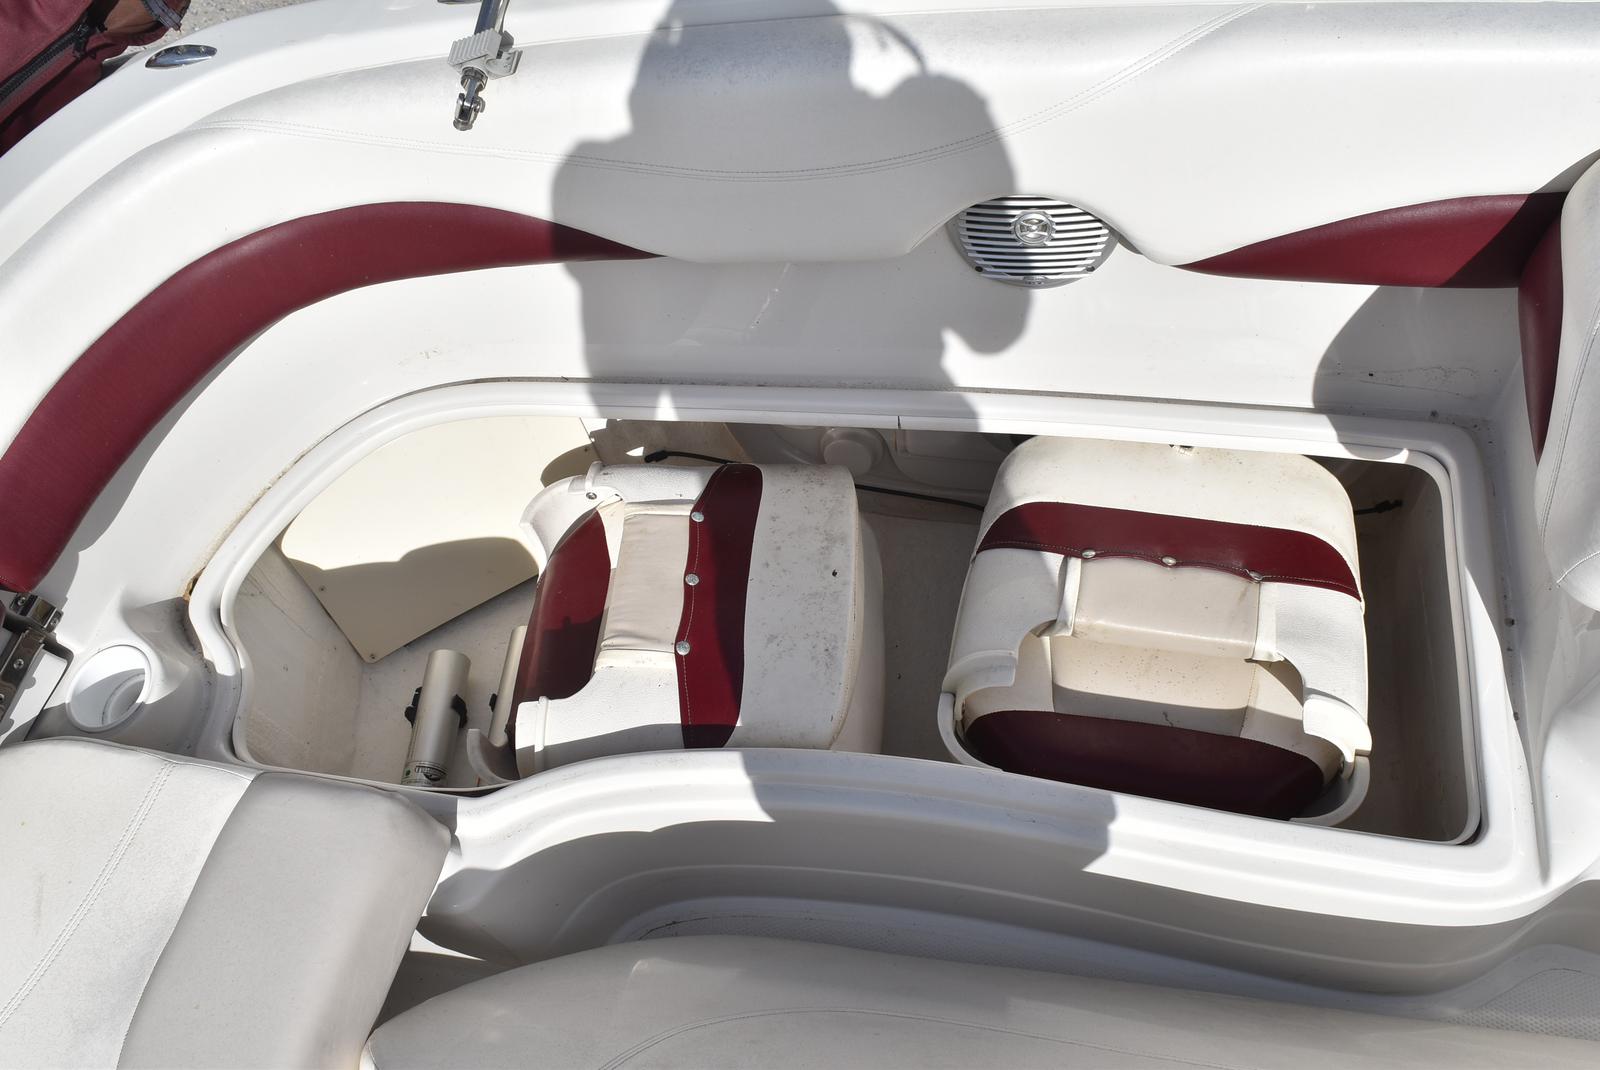 2008 Tahoe boat for sale, model of the boat is 215 & Image # 7 of 20